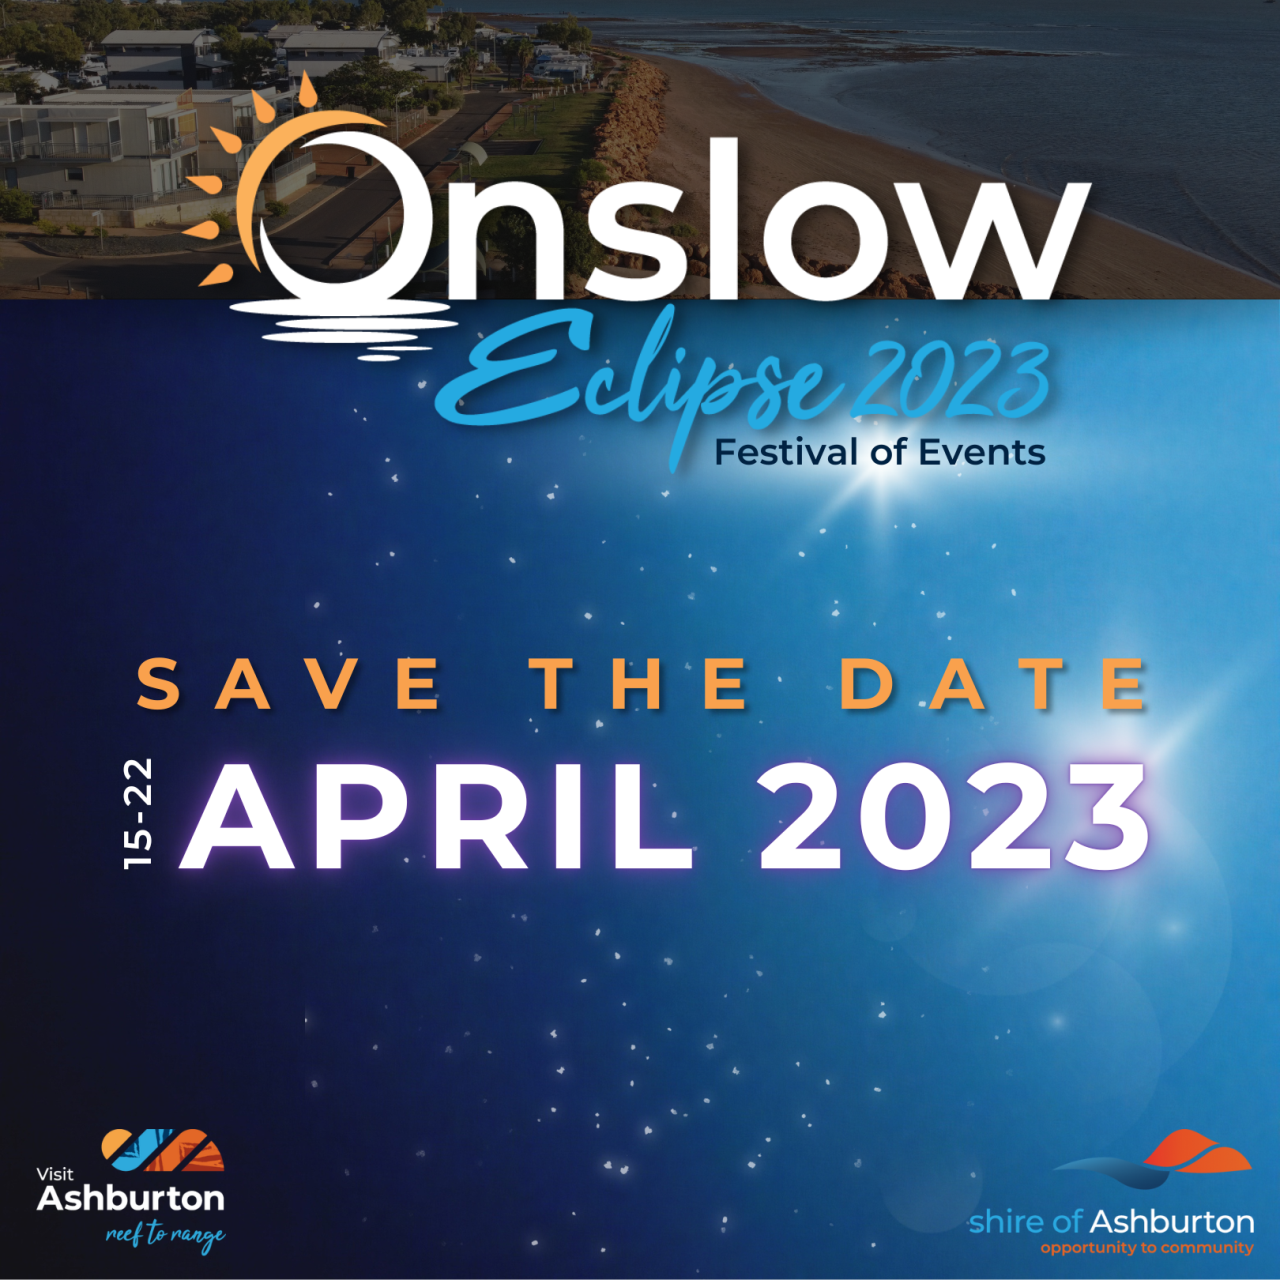 Onslow 2023 Solar Eclipse Festival of Events